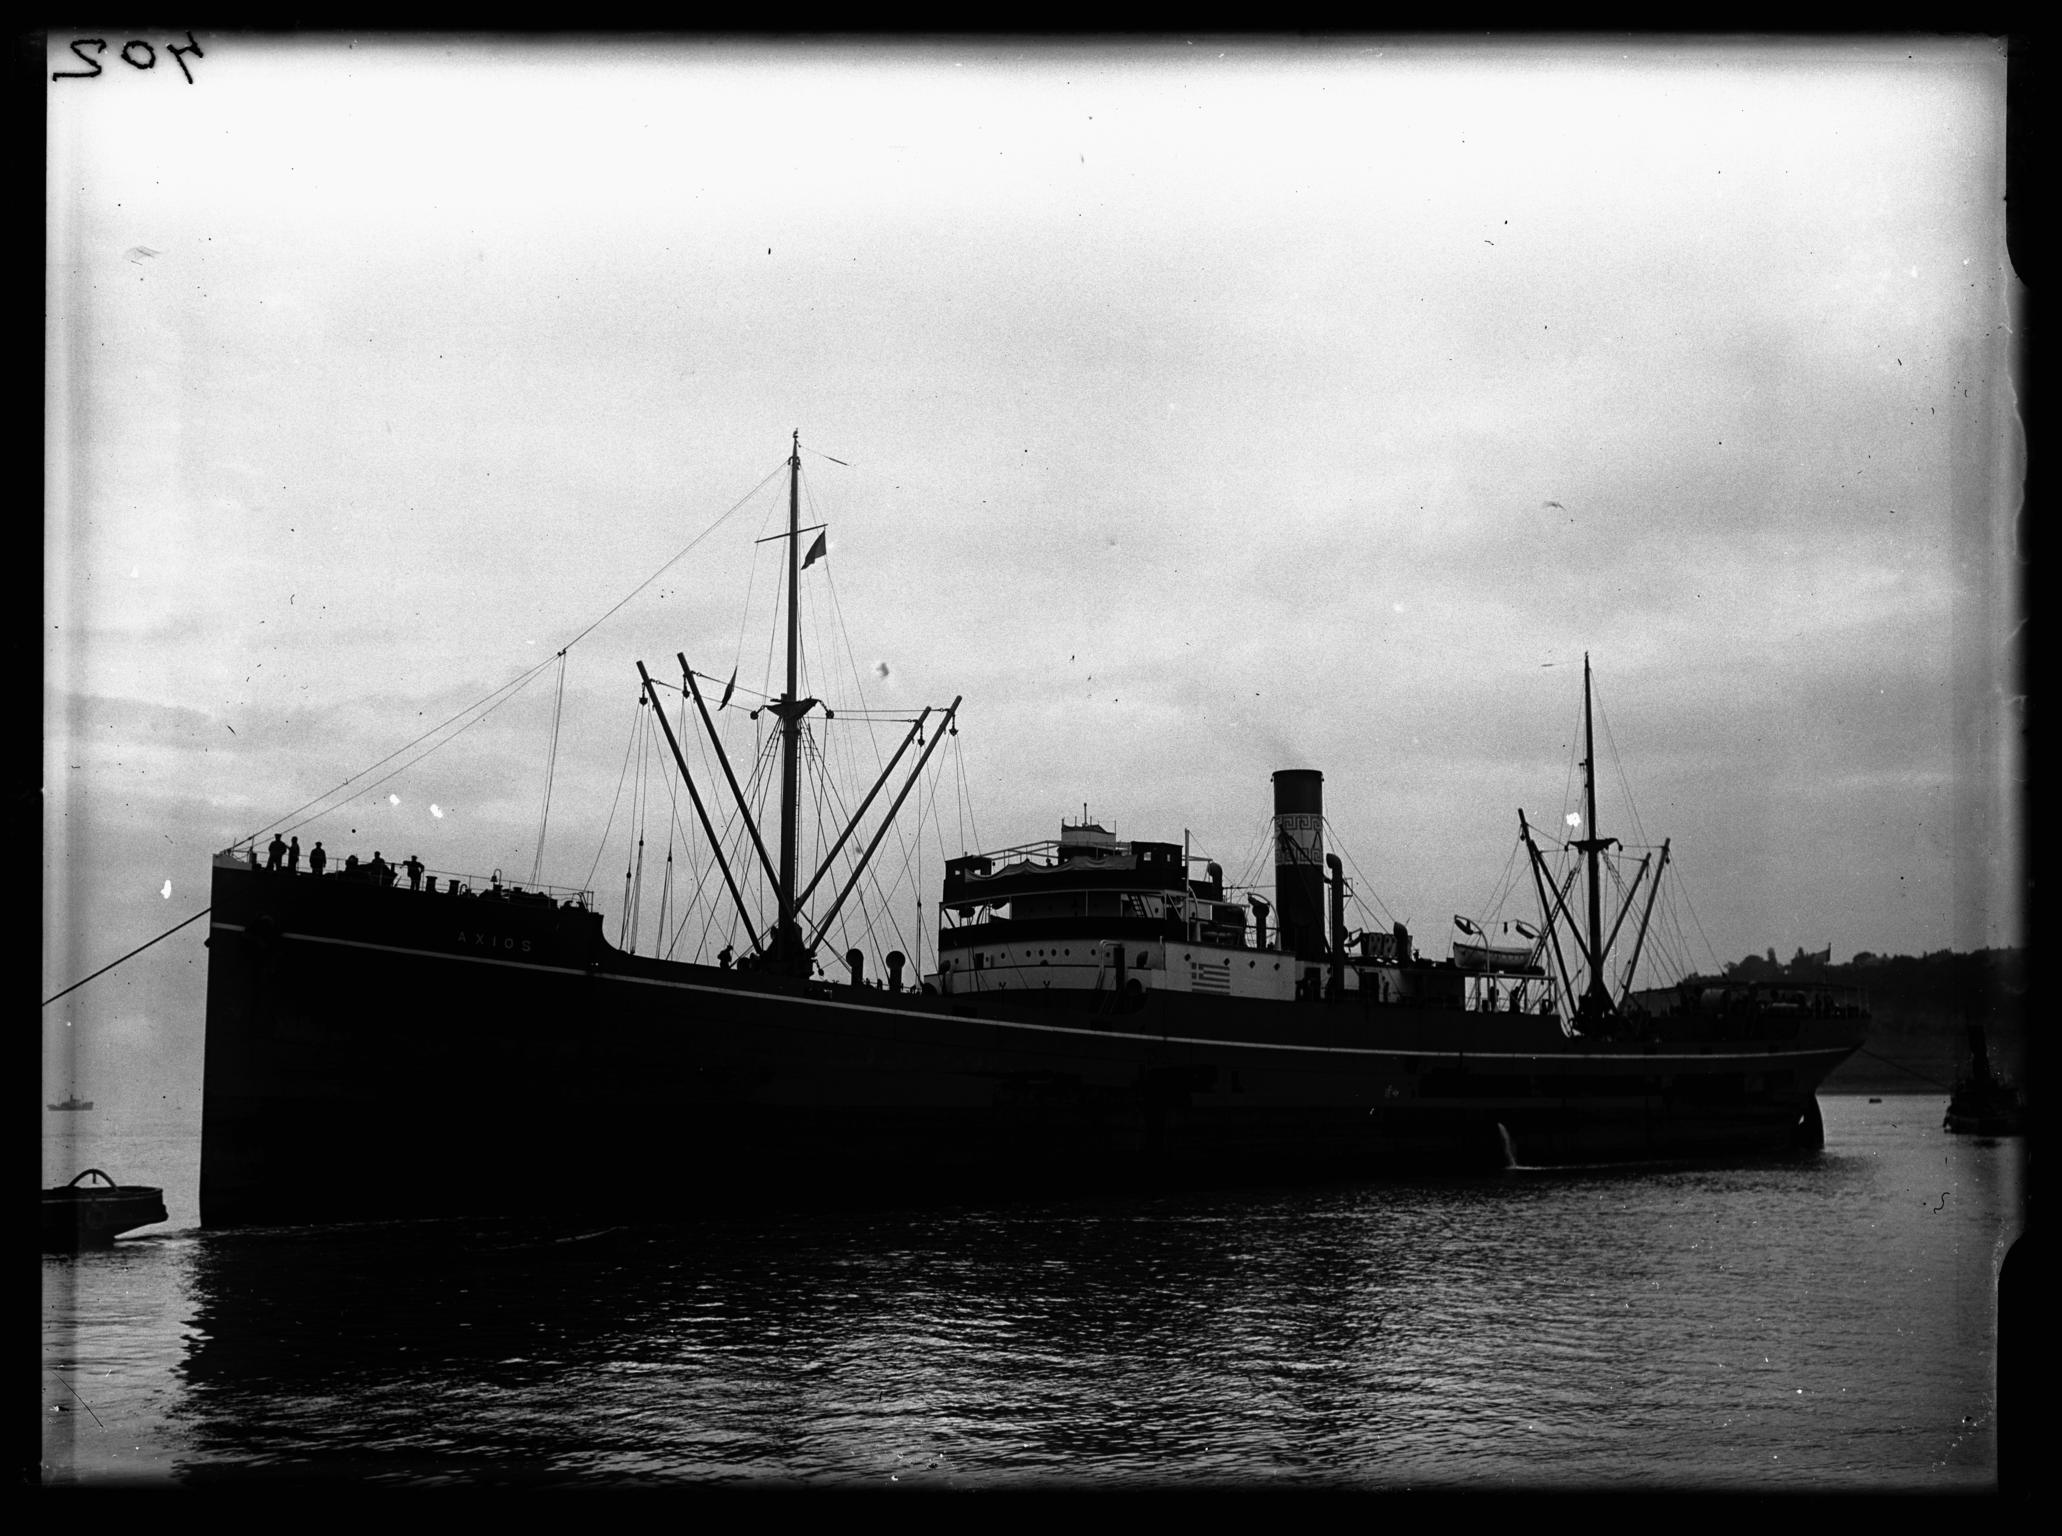 S.S. AXIOS, glass negative